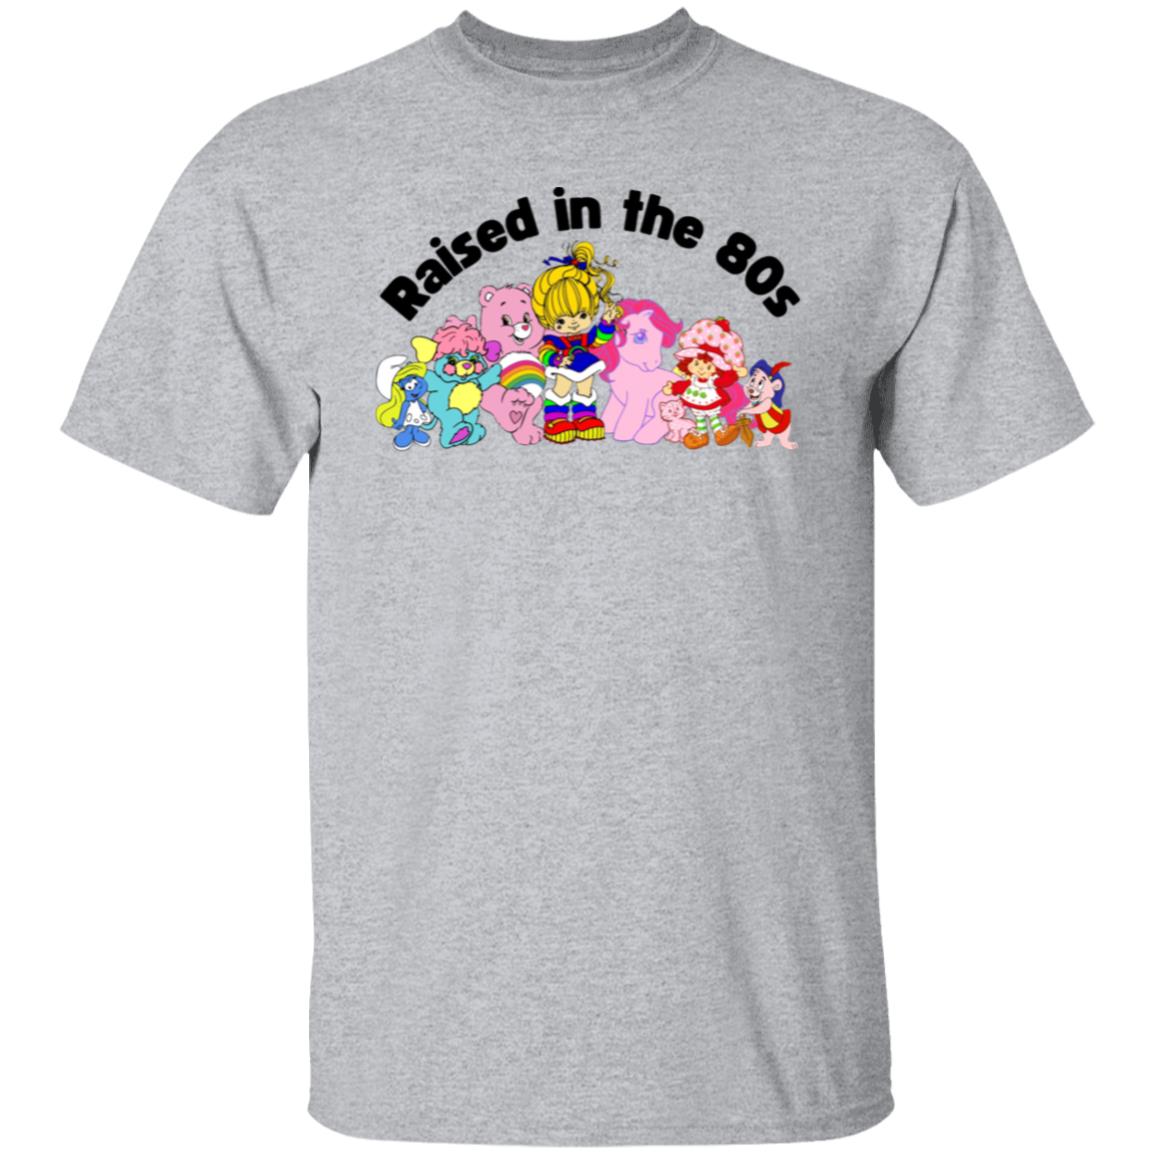 Raised in the 80s 5.3 oz. T-Shirt